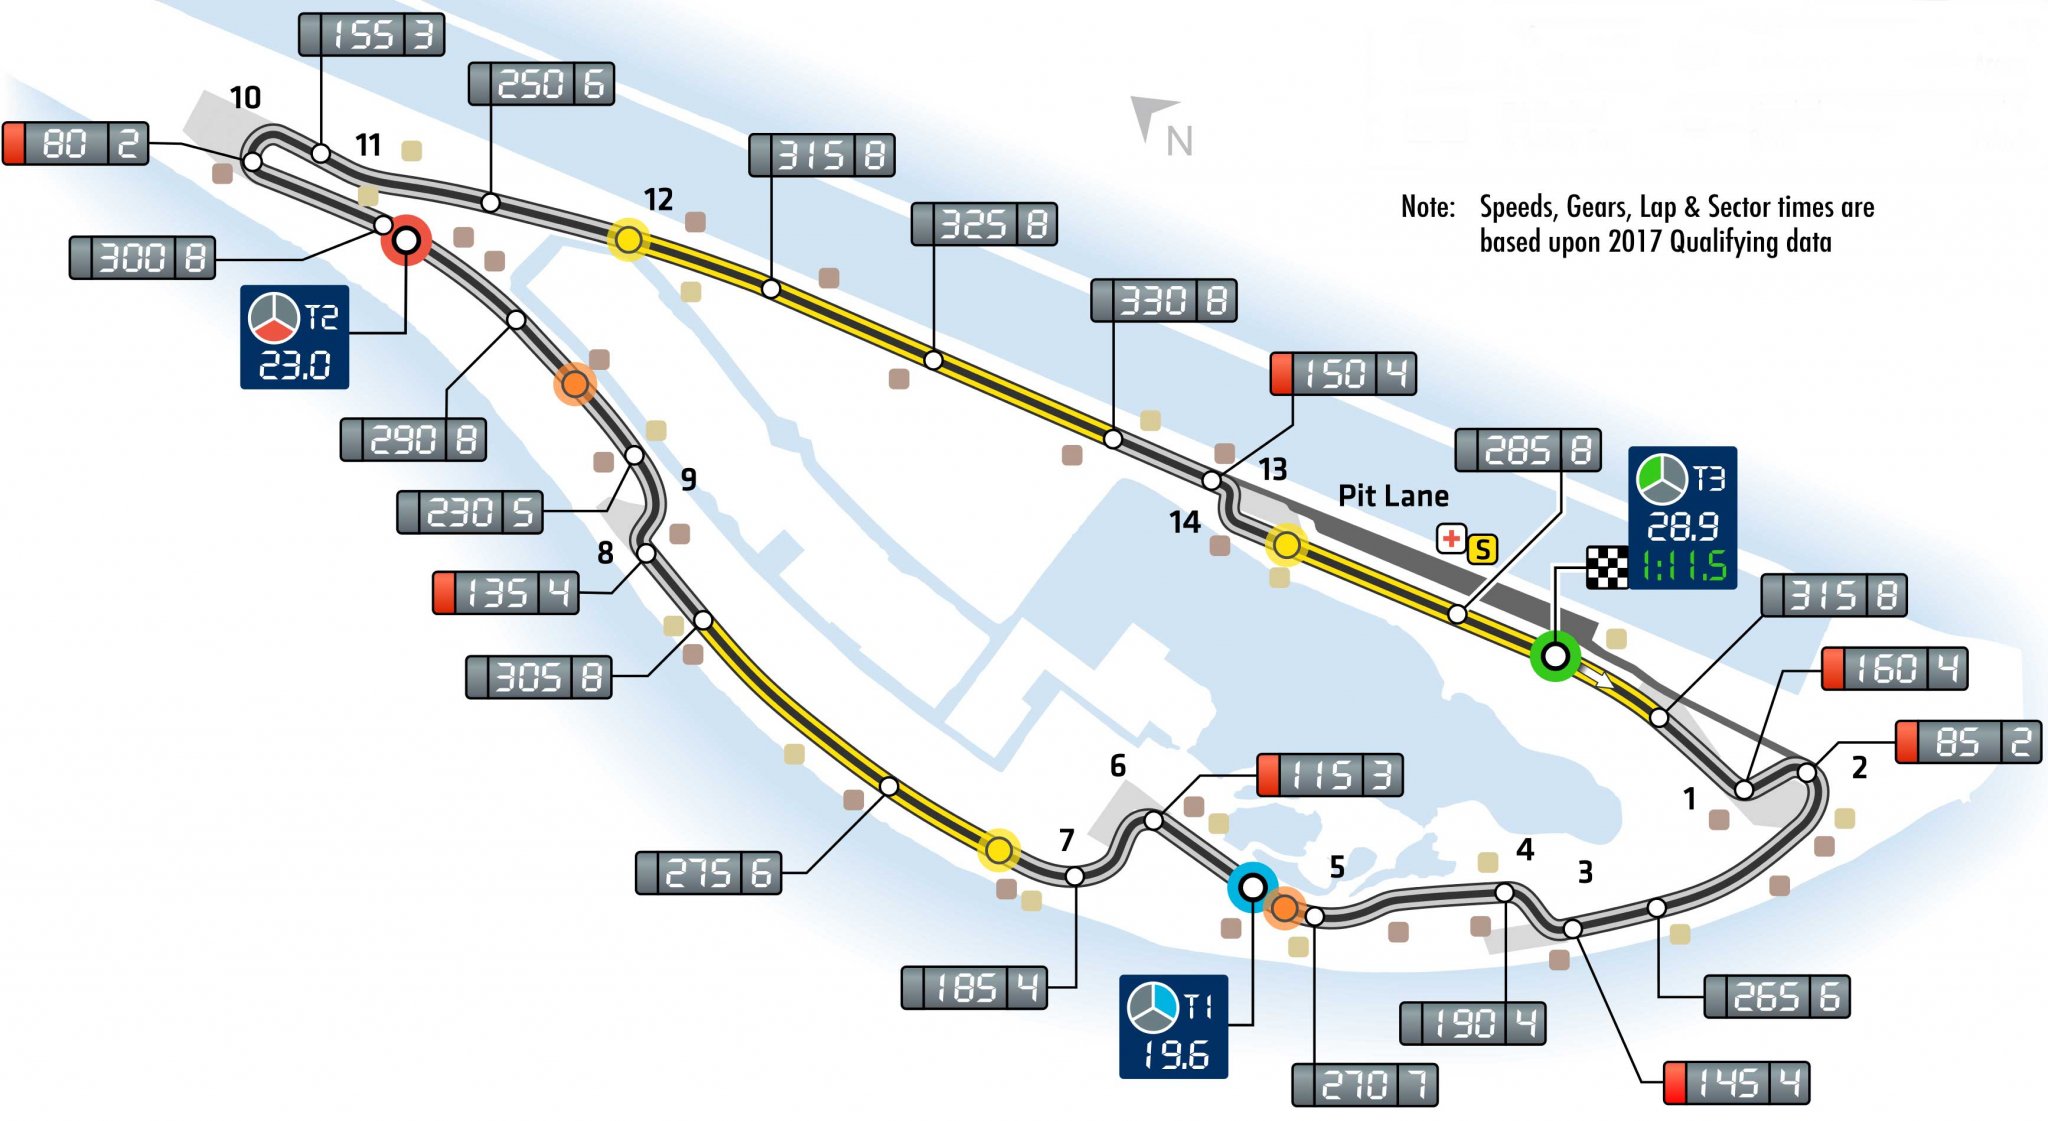 Track map for the 2023 Canadian Grand Prix - Image credit: F1-Fansite